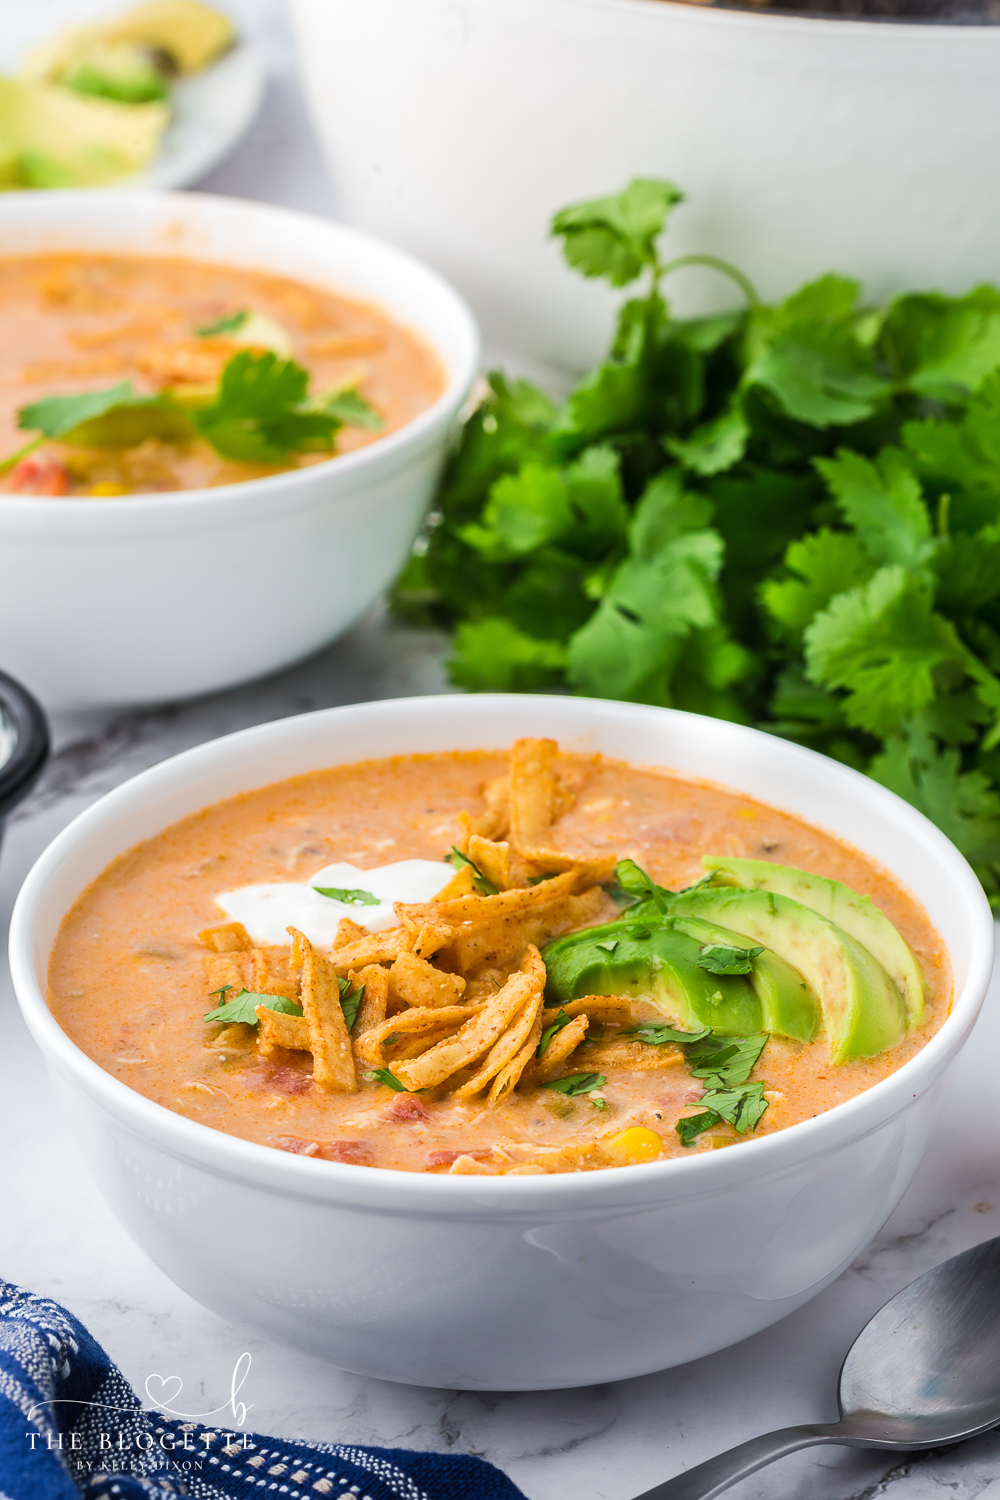 This Chicken Enchilada Soup is thick, creamy, cheesy, and ready to go in just 20 minutes! It can be made on the stove top or crock-pot. EASY!